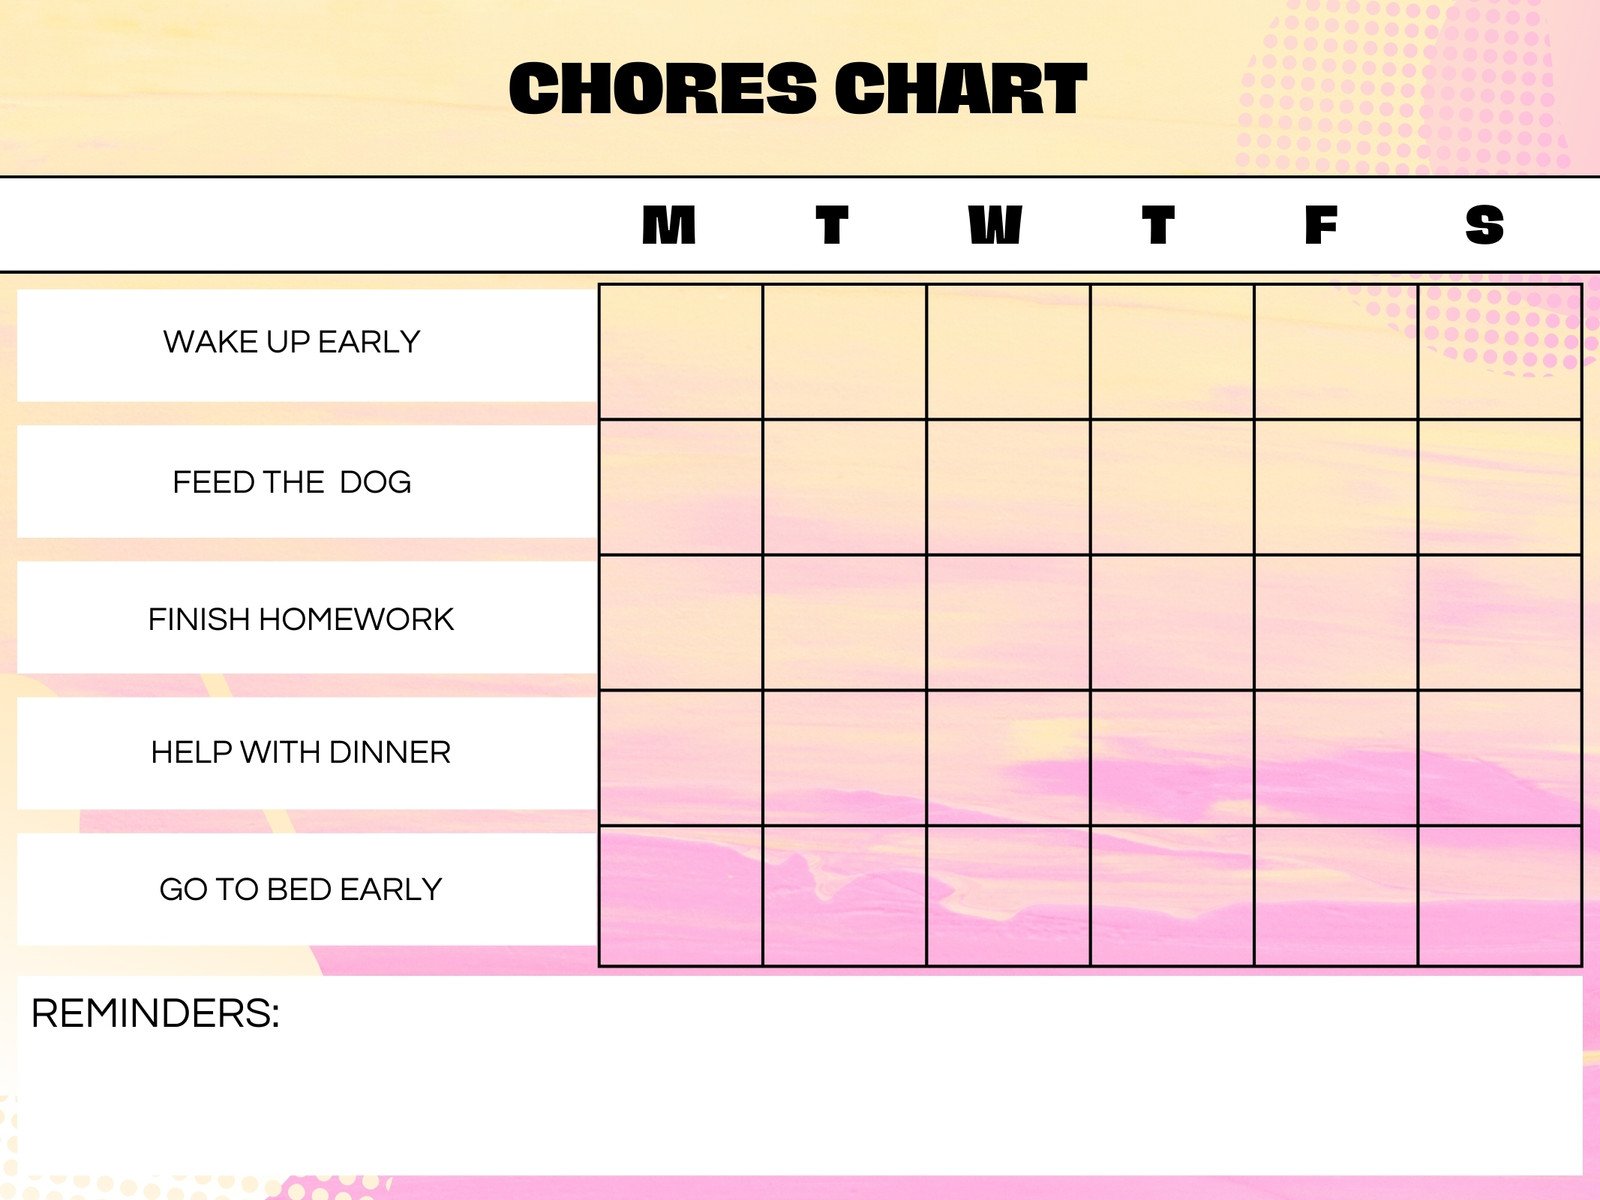 Free Family Chore Chart Templates - With the Huddlestons